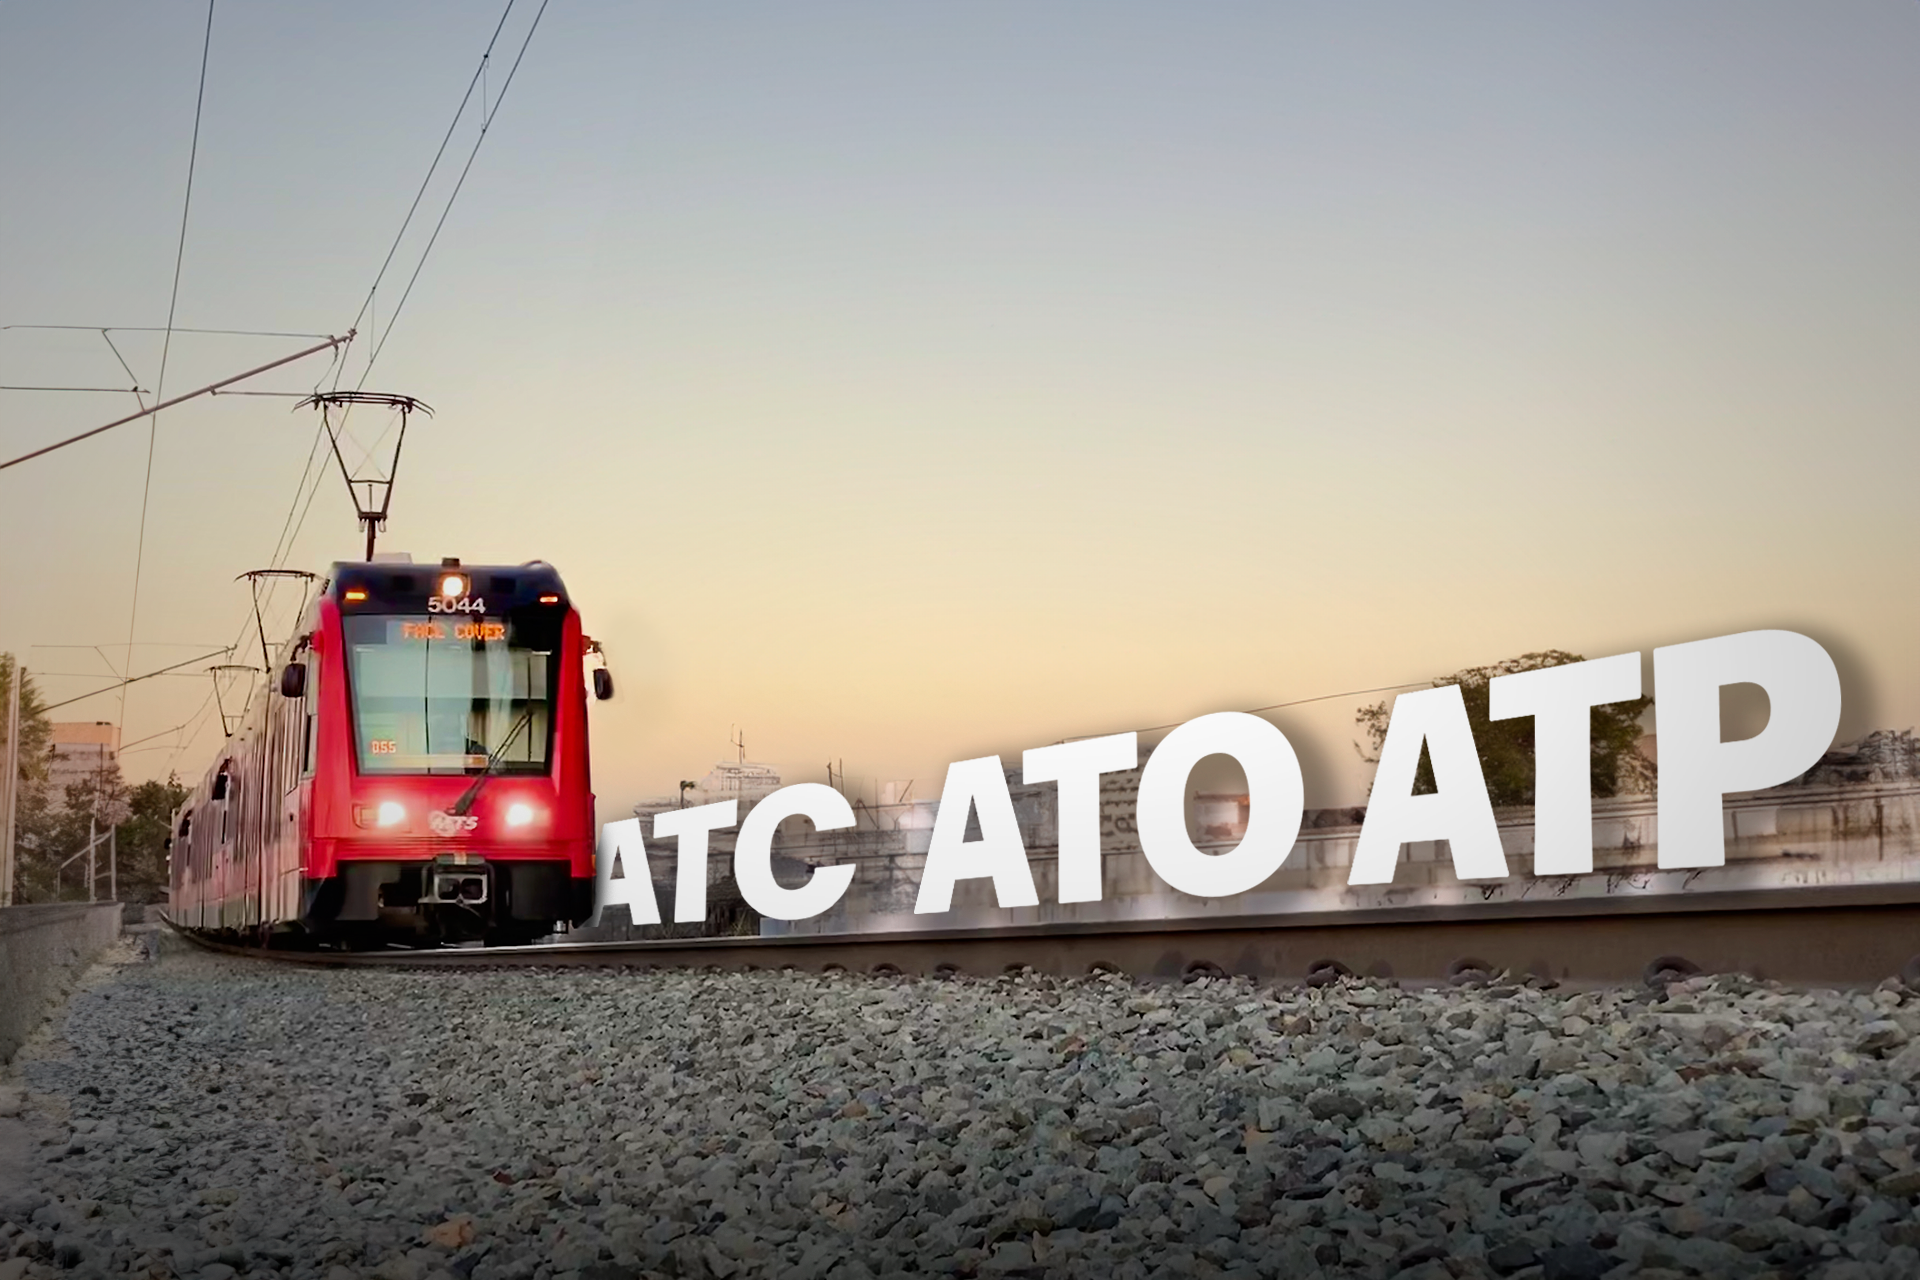 A red train is going down the tracks next to a sign that says atc ato atp